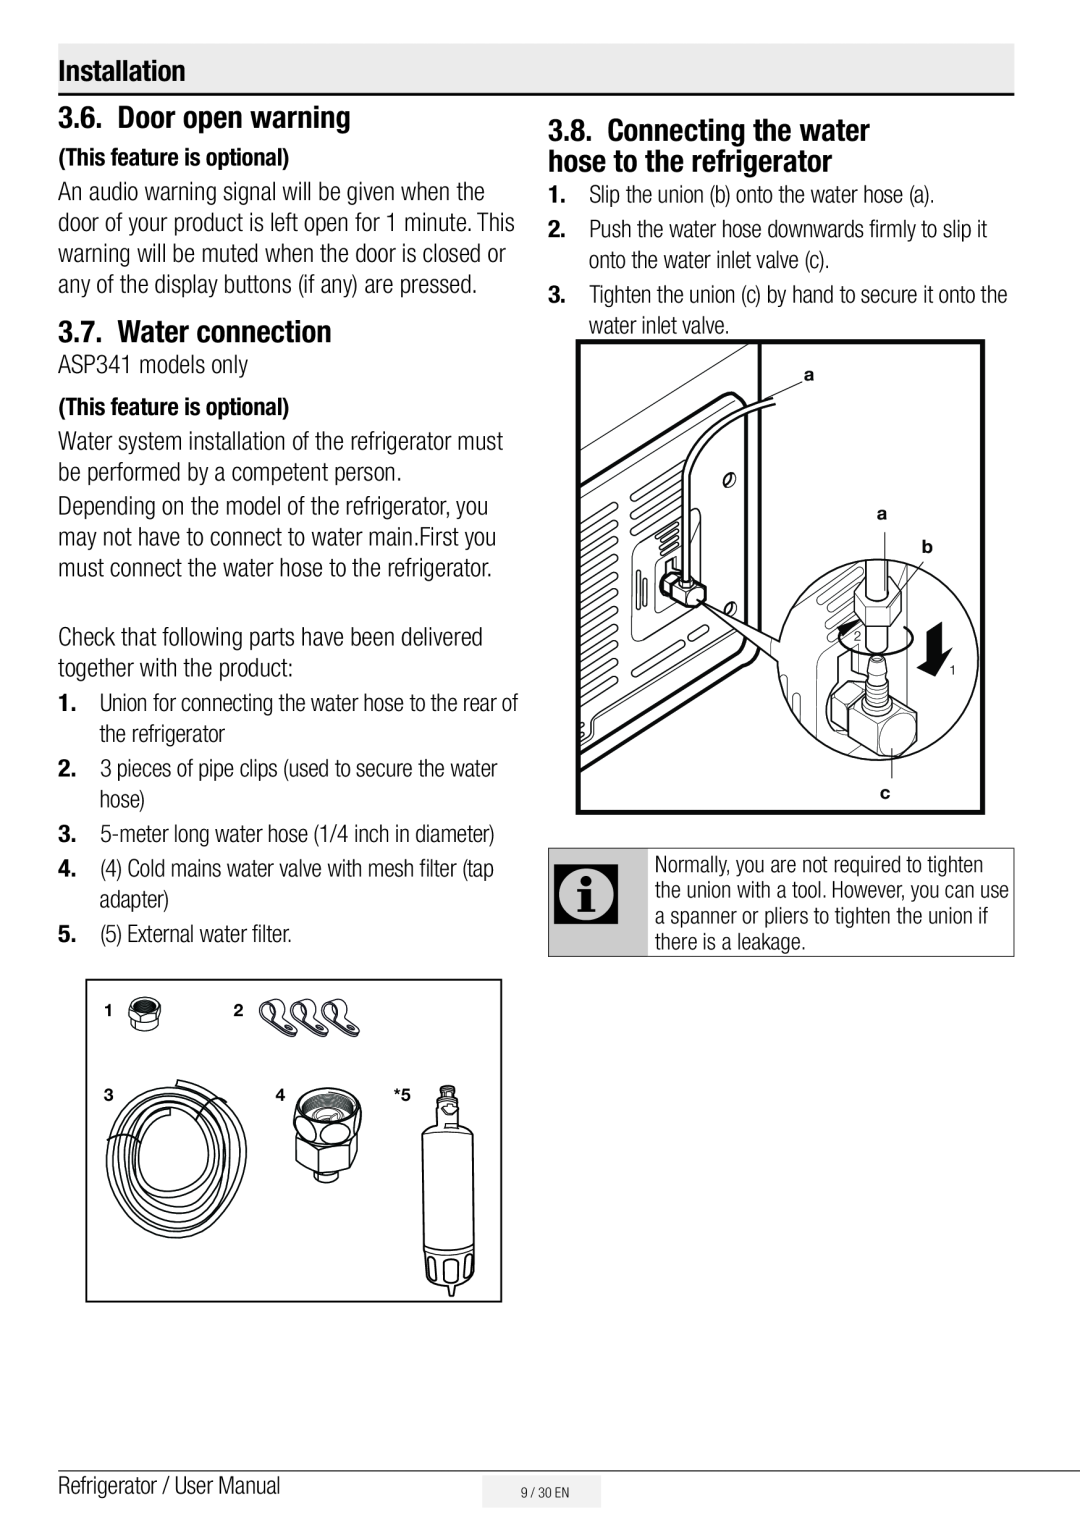 Beko ASN541S, ASN541B Door open warning, Water connection, Connecting the water hose to the refrigerator, Installation 